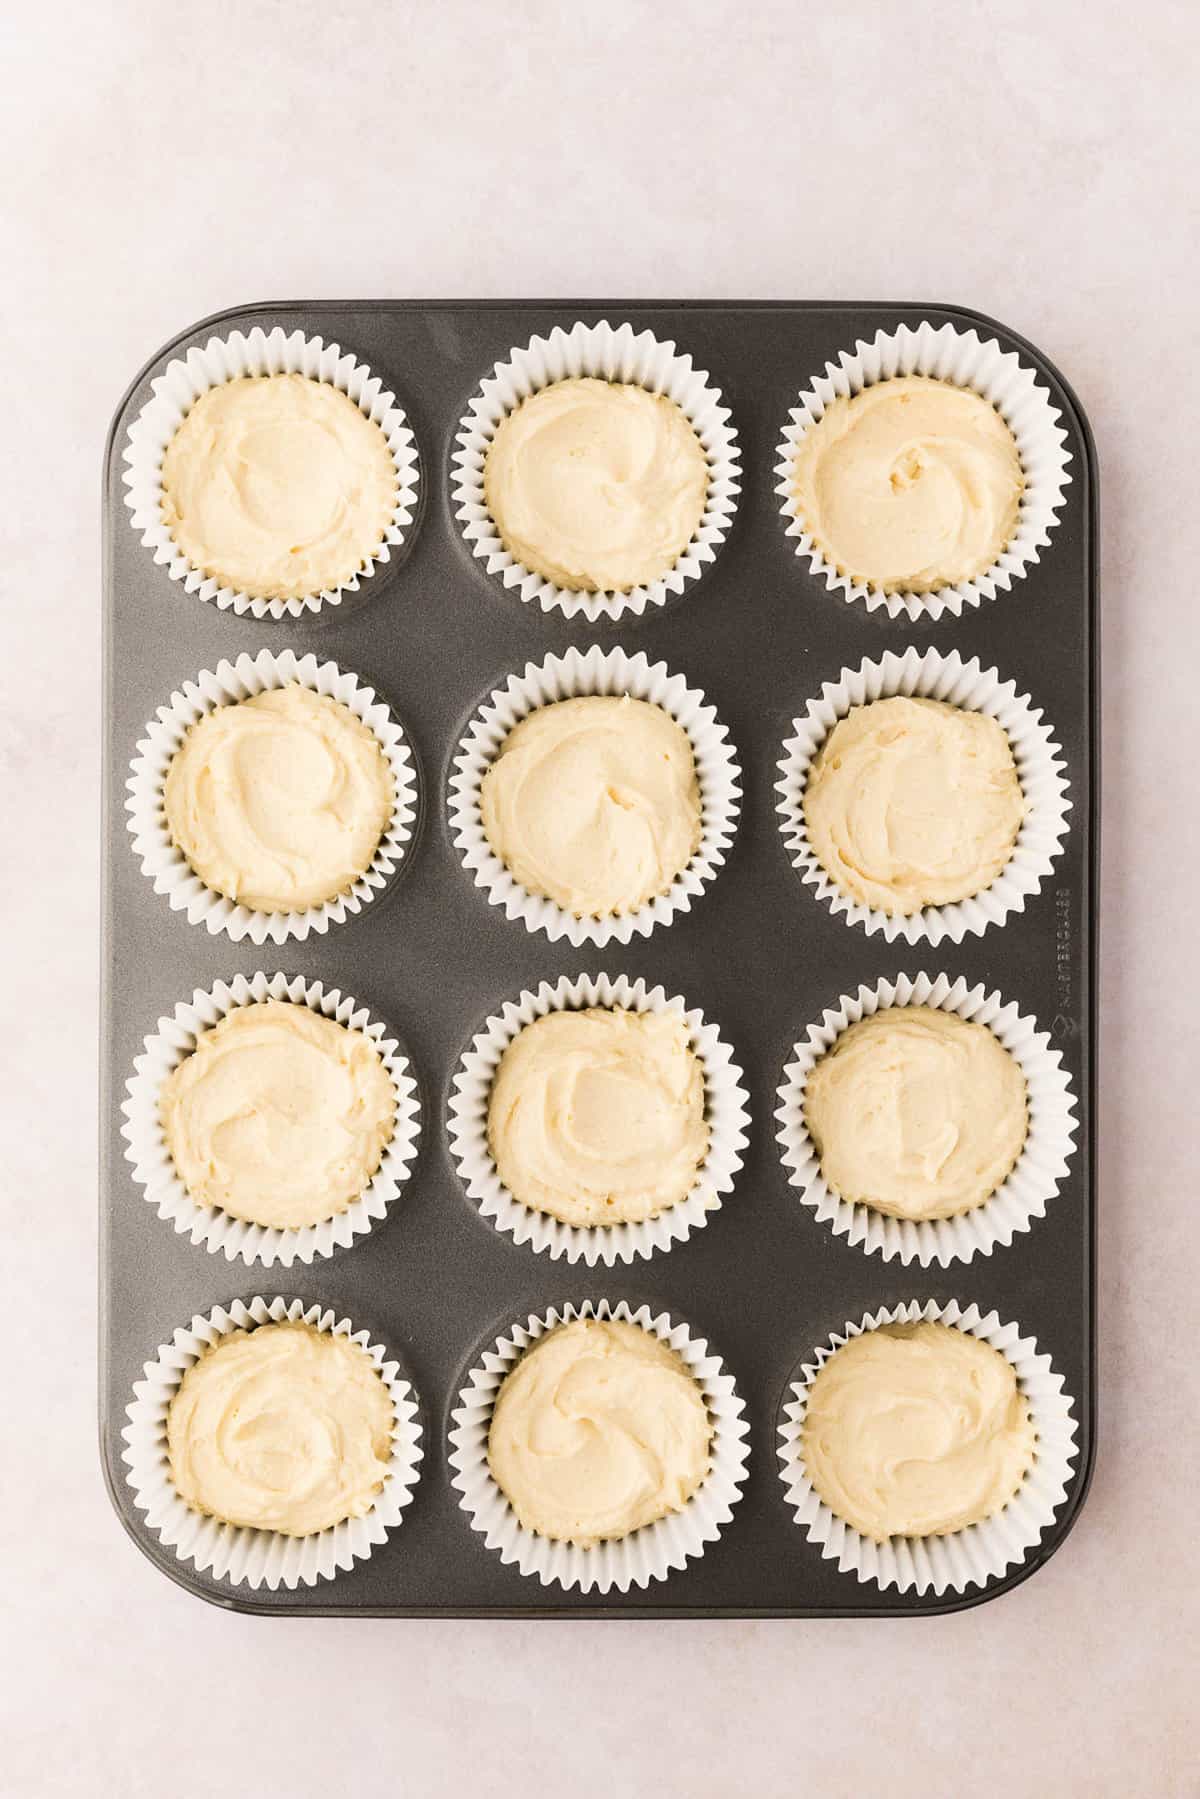 Adding Batter to Cupcake Liners in Muffin Tin for Easter Cupcakes